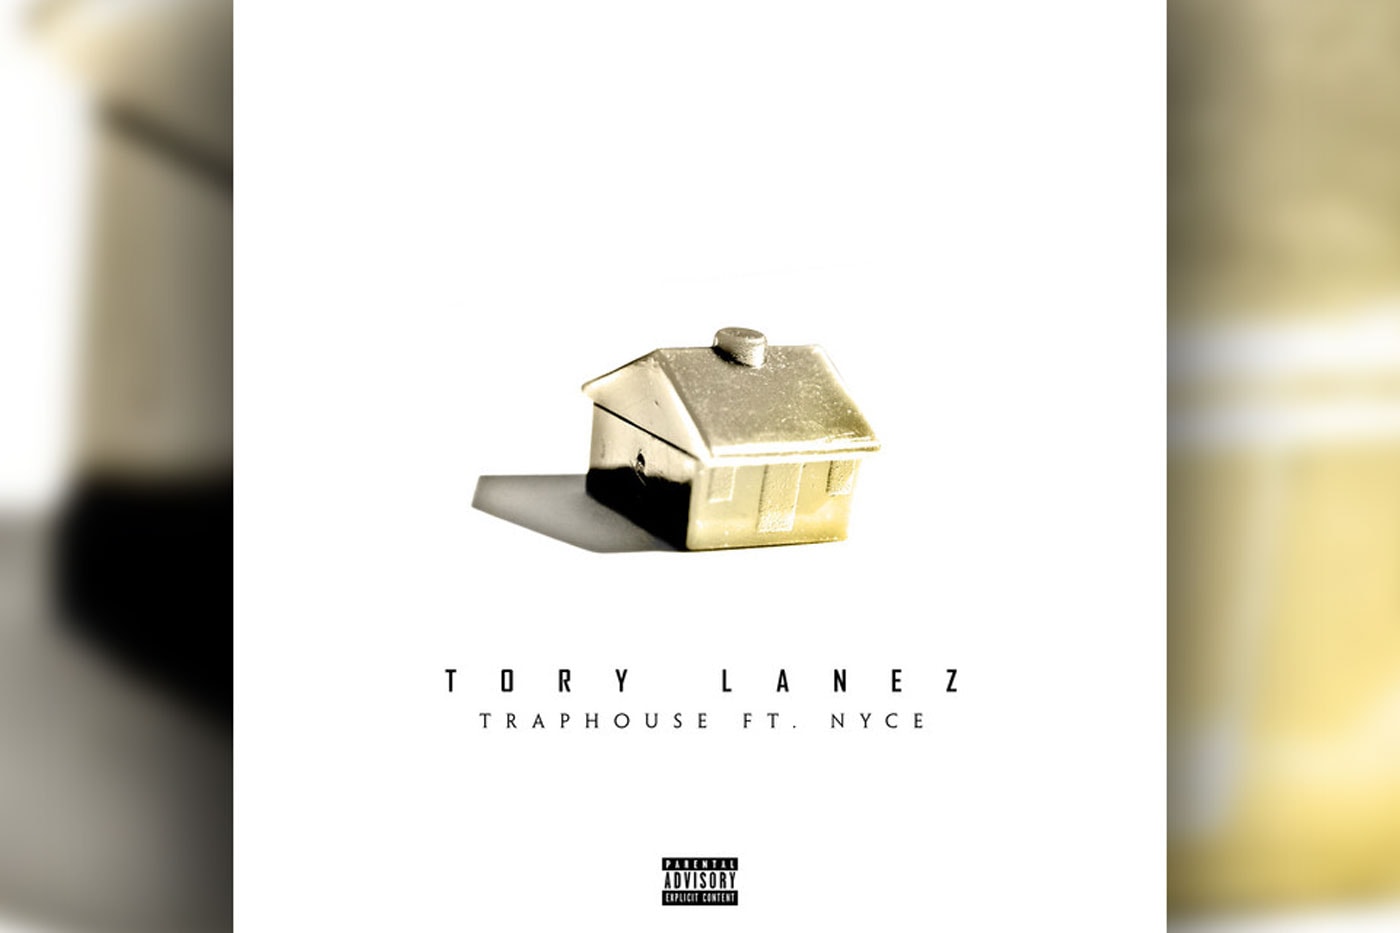 Tory Lanez Gets Darker on New Single "Traphouse"